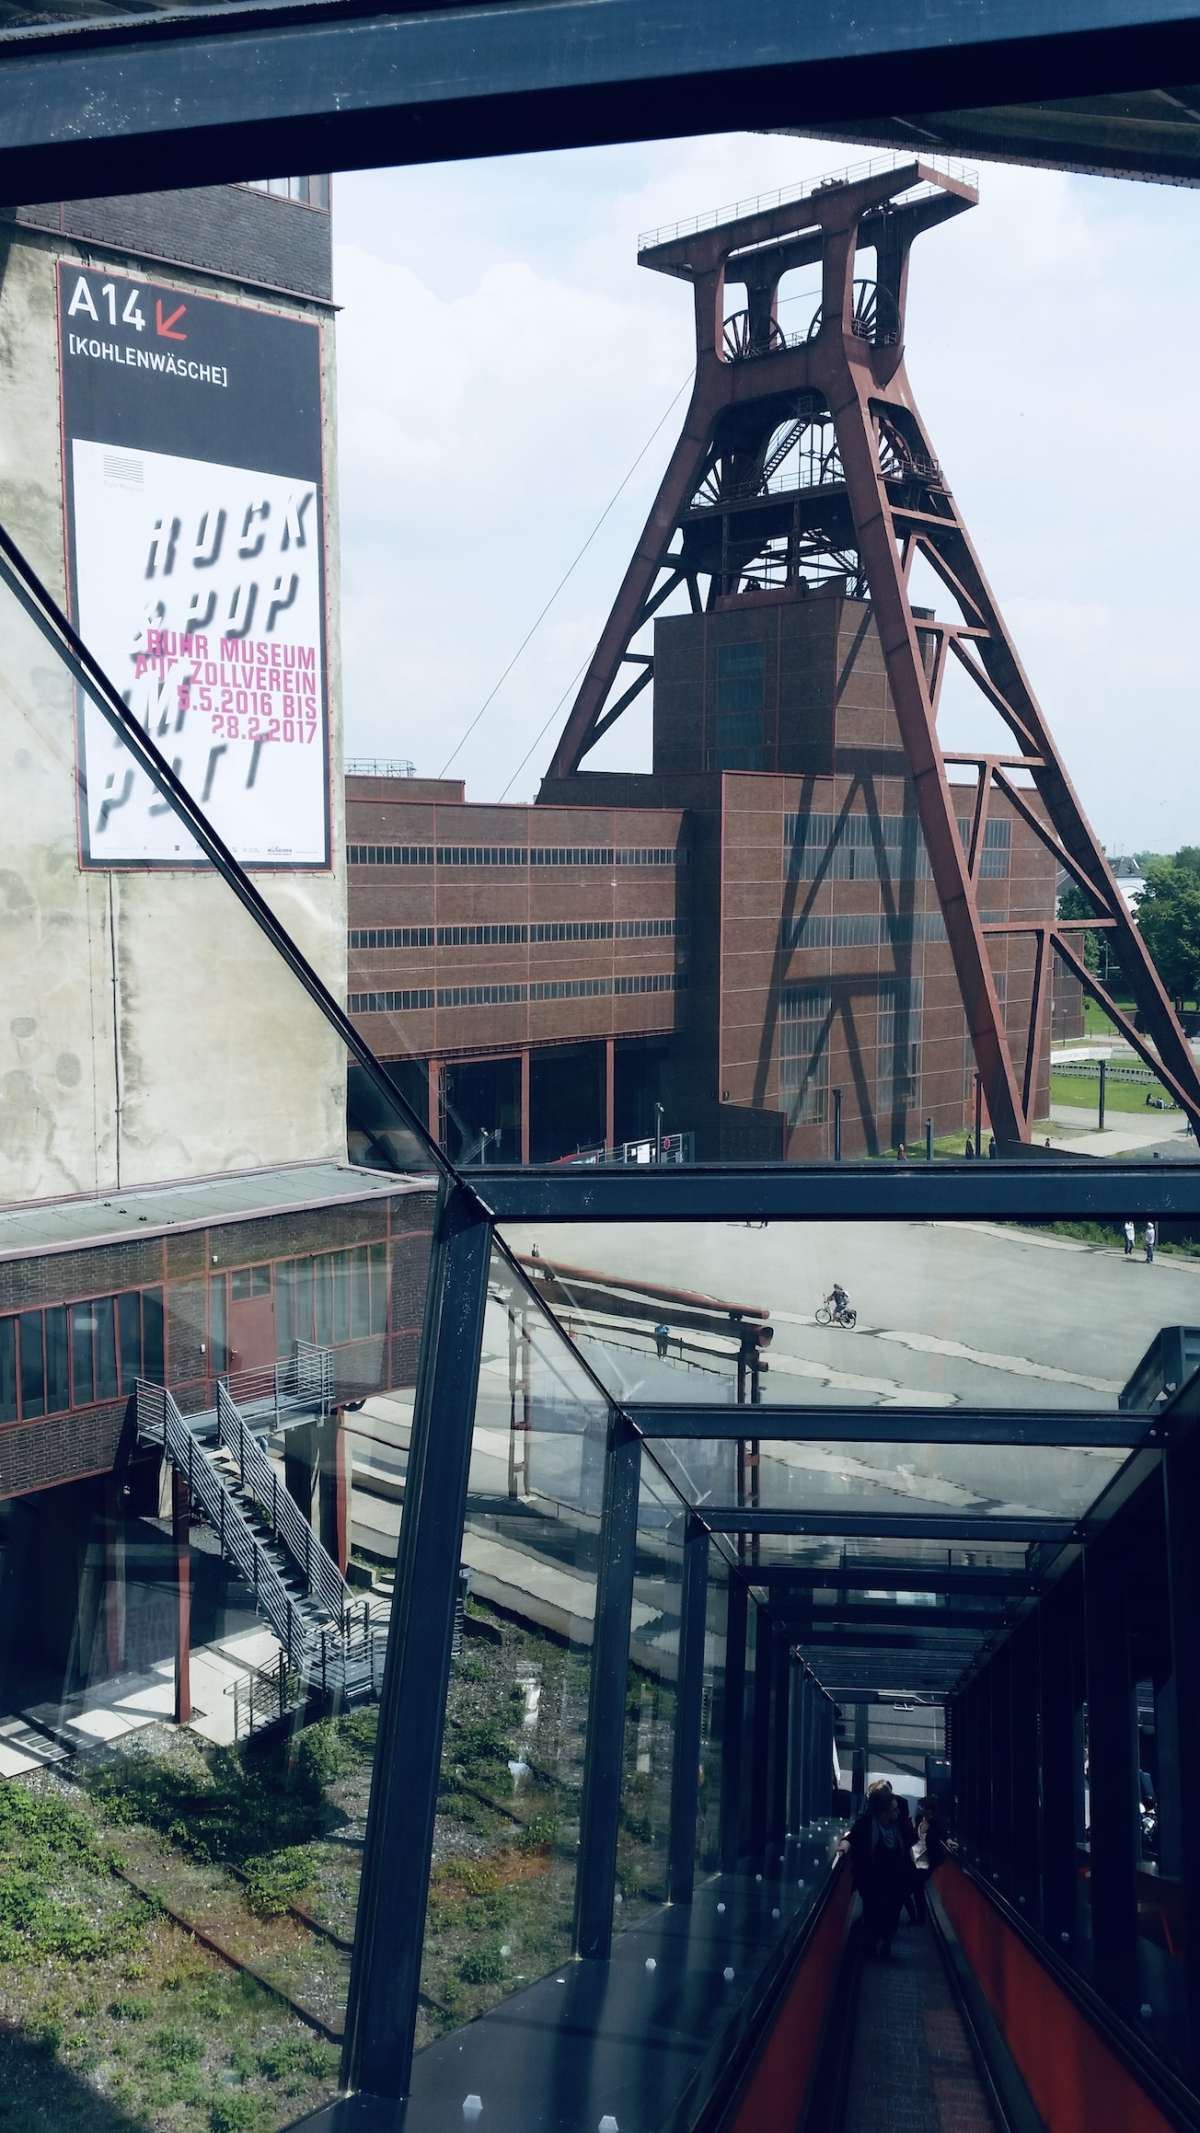 View from a glass-enclosed walkway overlooking the industrial architecture of the Zollverein Coal Mine Industrial Complex in Cologne, a testament to the city's rich industrial heritage and a nod to gay Cologne's blend of history and modernity.